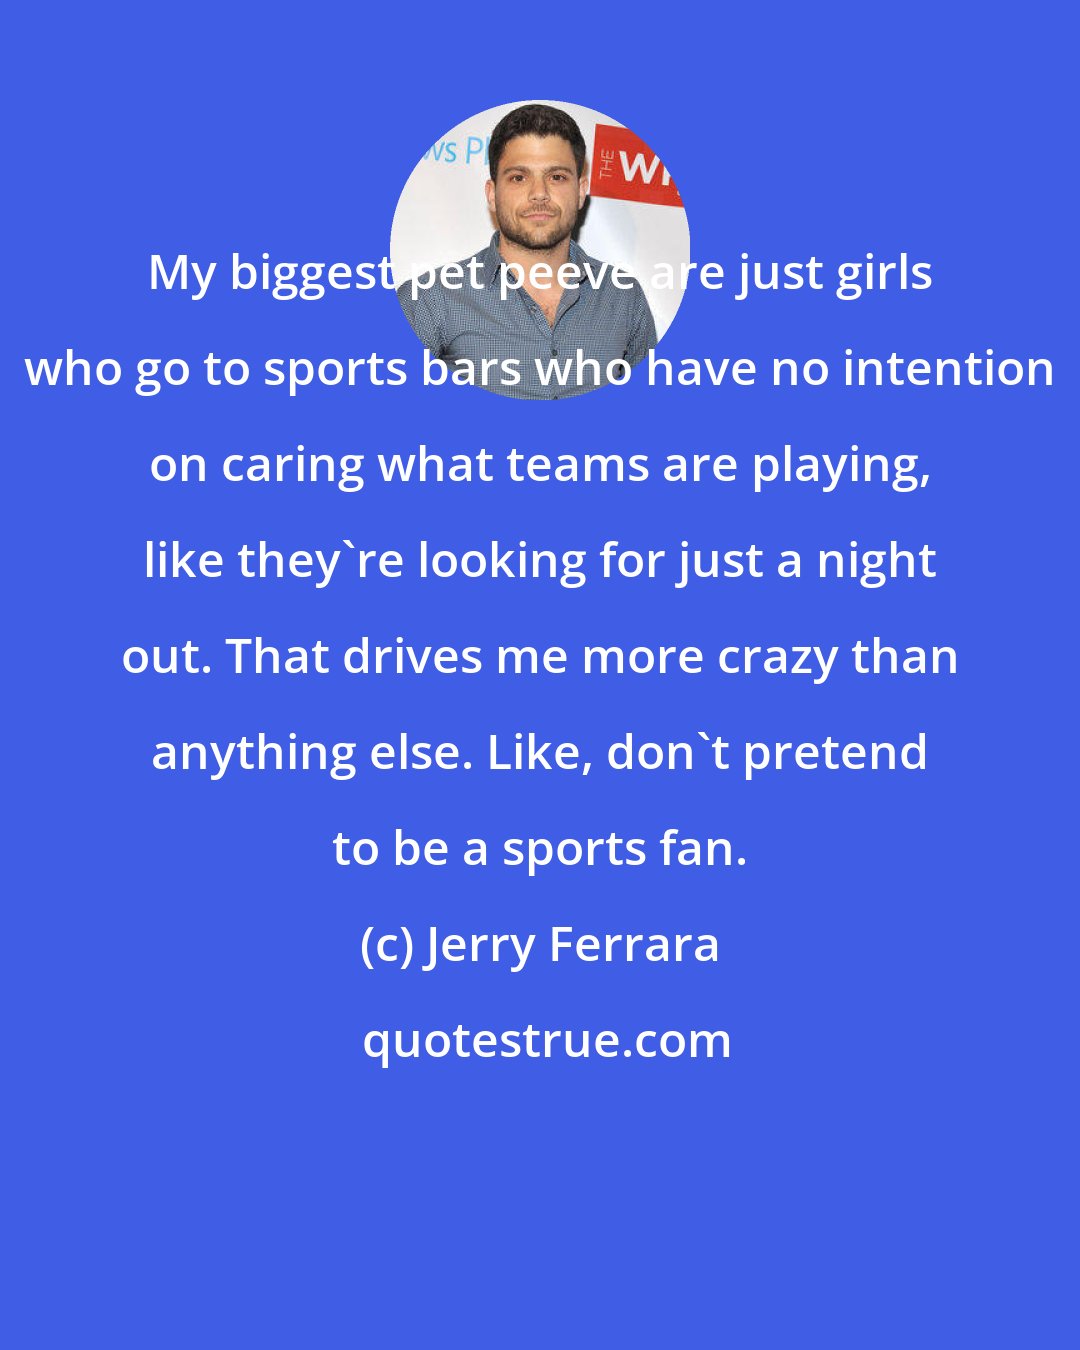 Jerry Ferrara: My biggest pet peeve are just girls who go to sports bars who have no intention on caring what teams are playing, like they're looking for just a night out. That drives me more crazy than anything else. Like, don't pretend to be a sports fan.